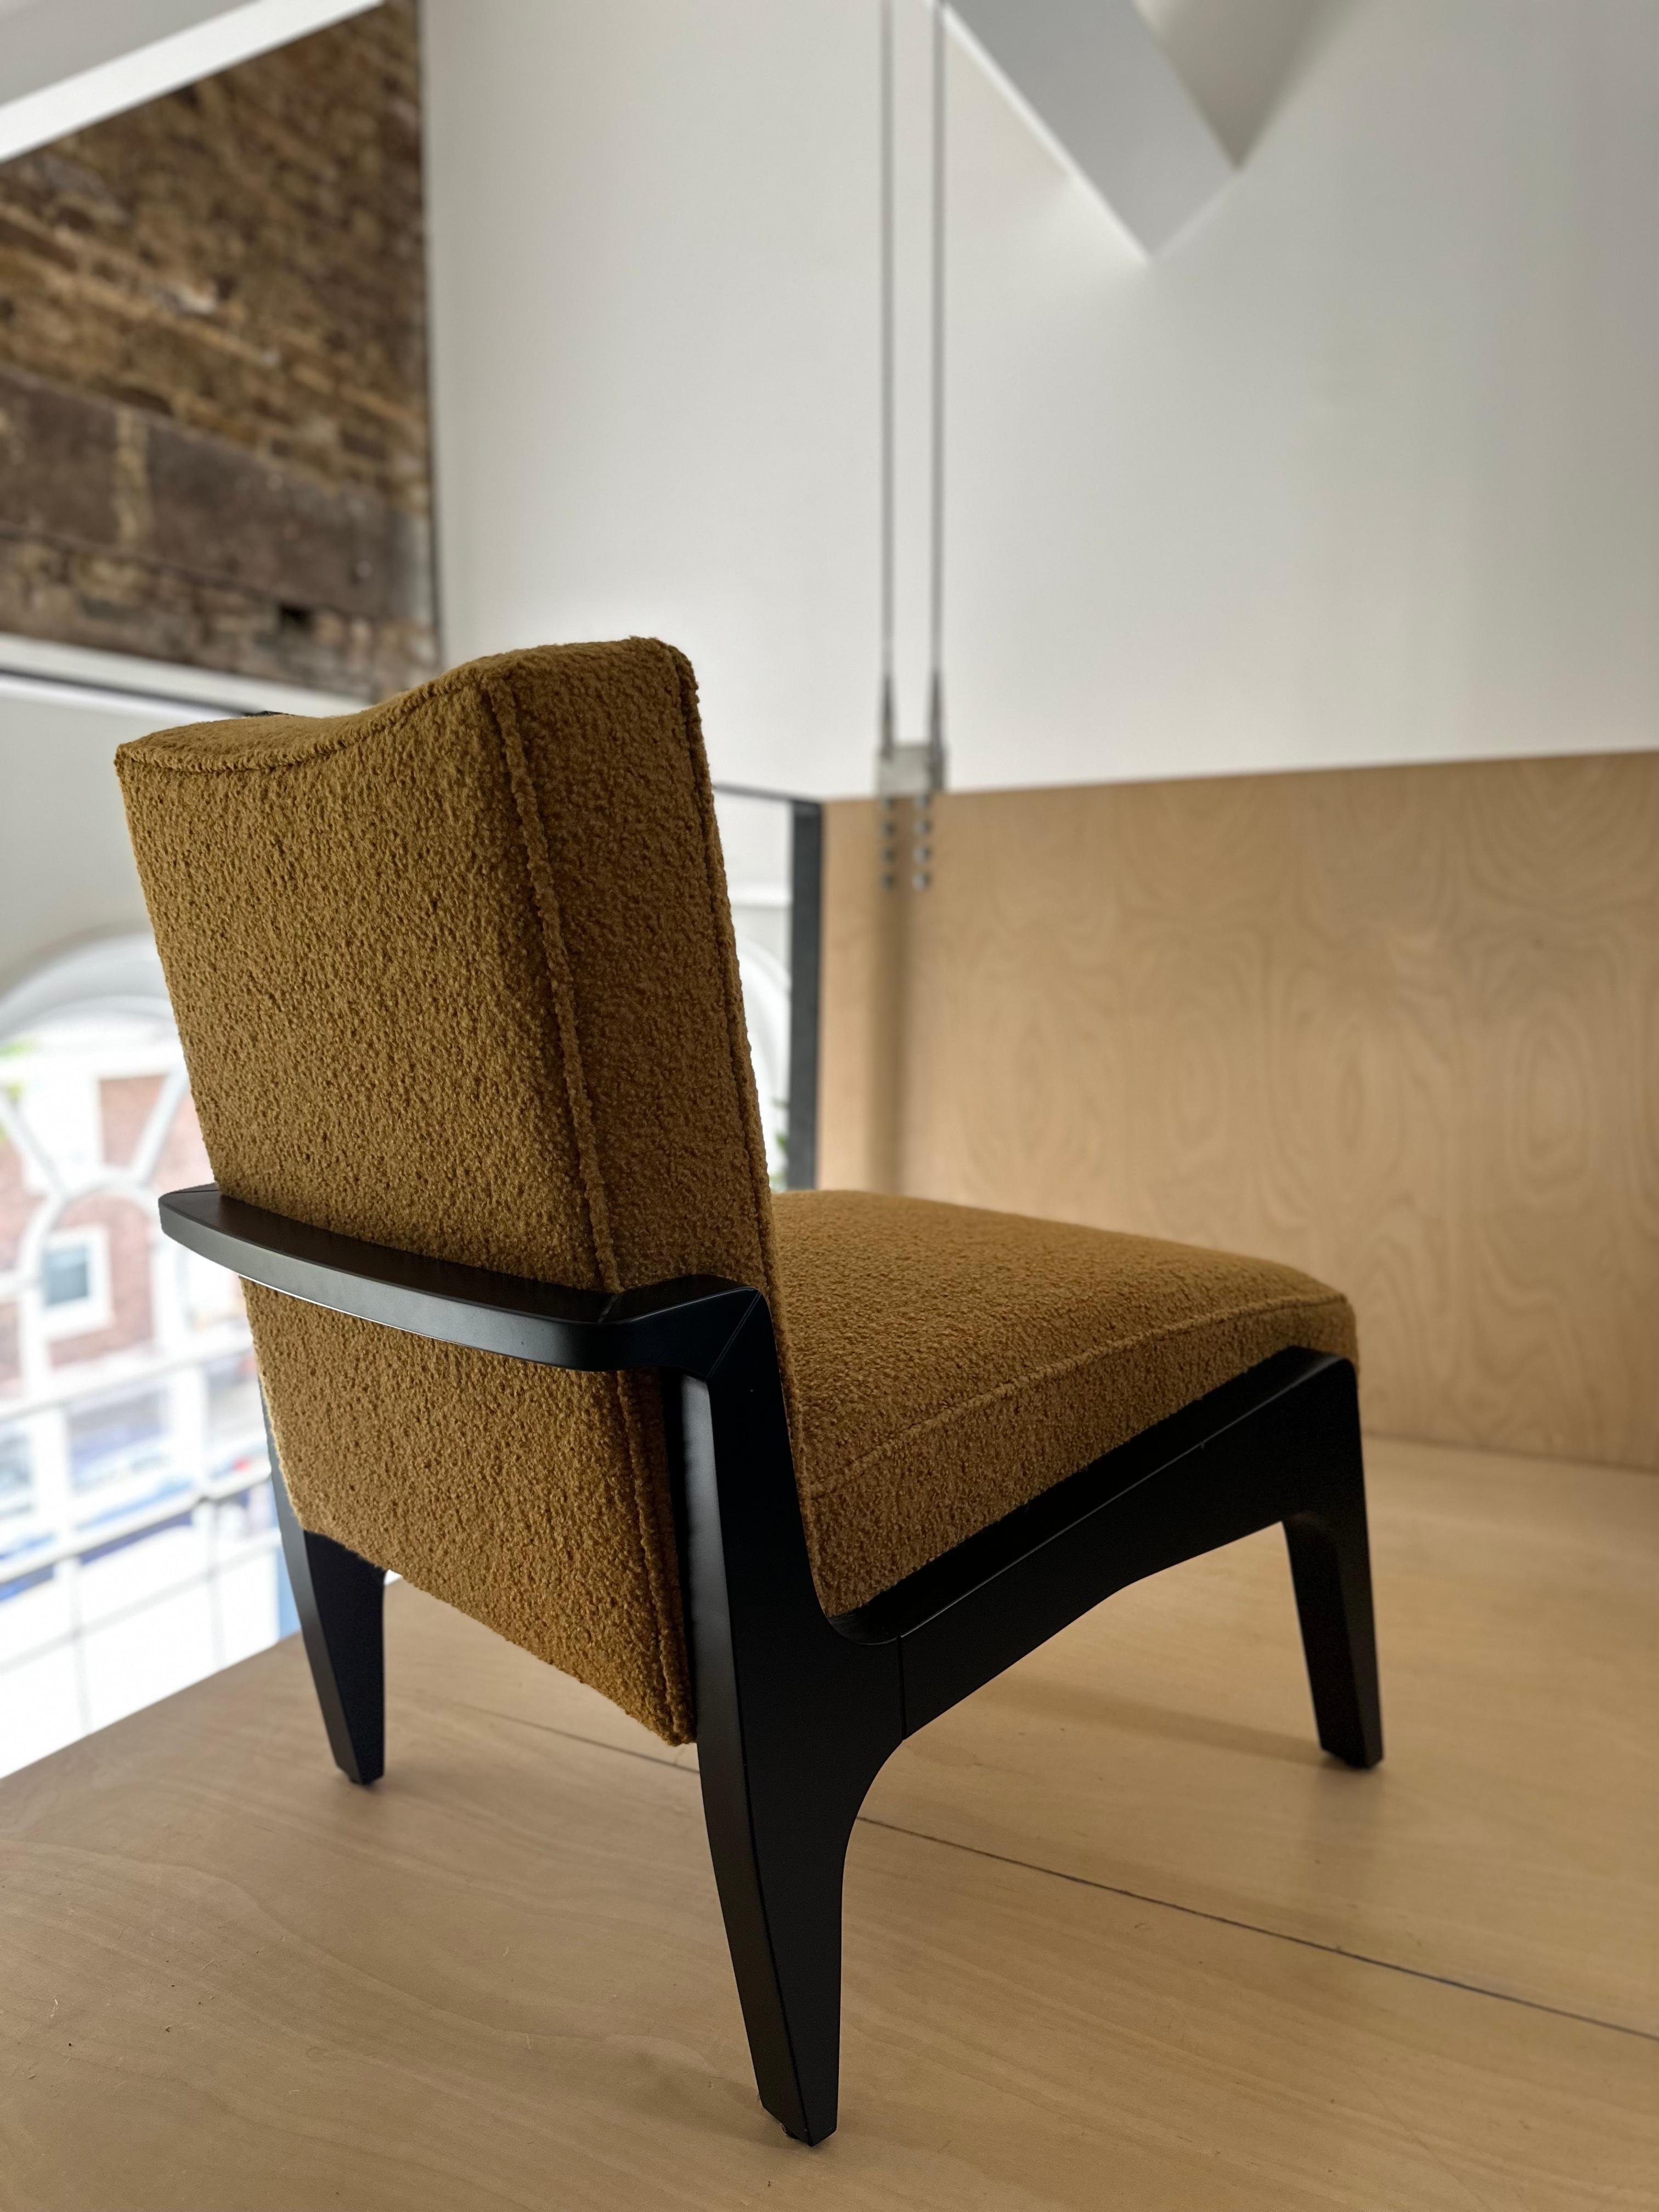 Custom Made Art Deco Inspired Atena Chair Black Ebony and Butternut Boucle In New Condition For Sale In London, GB